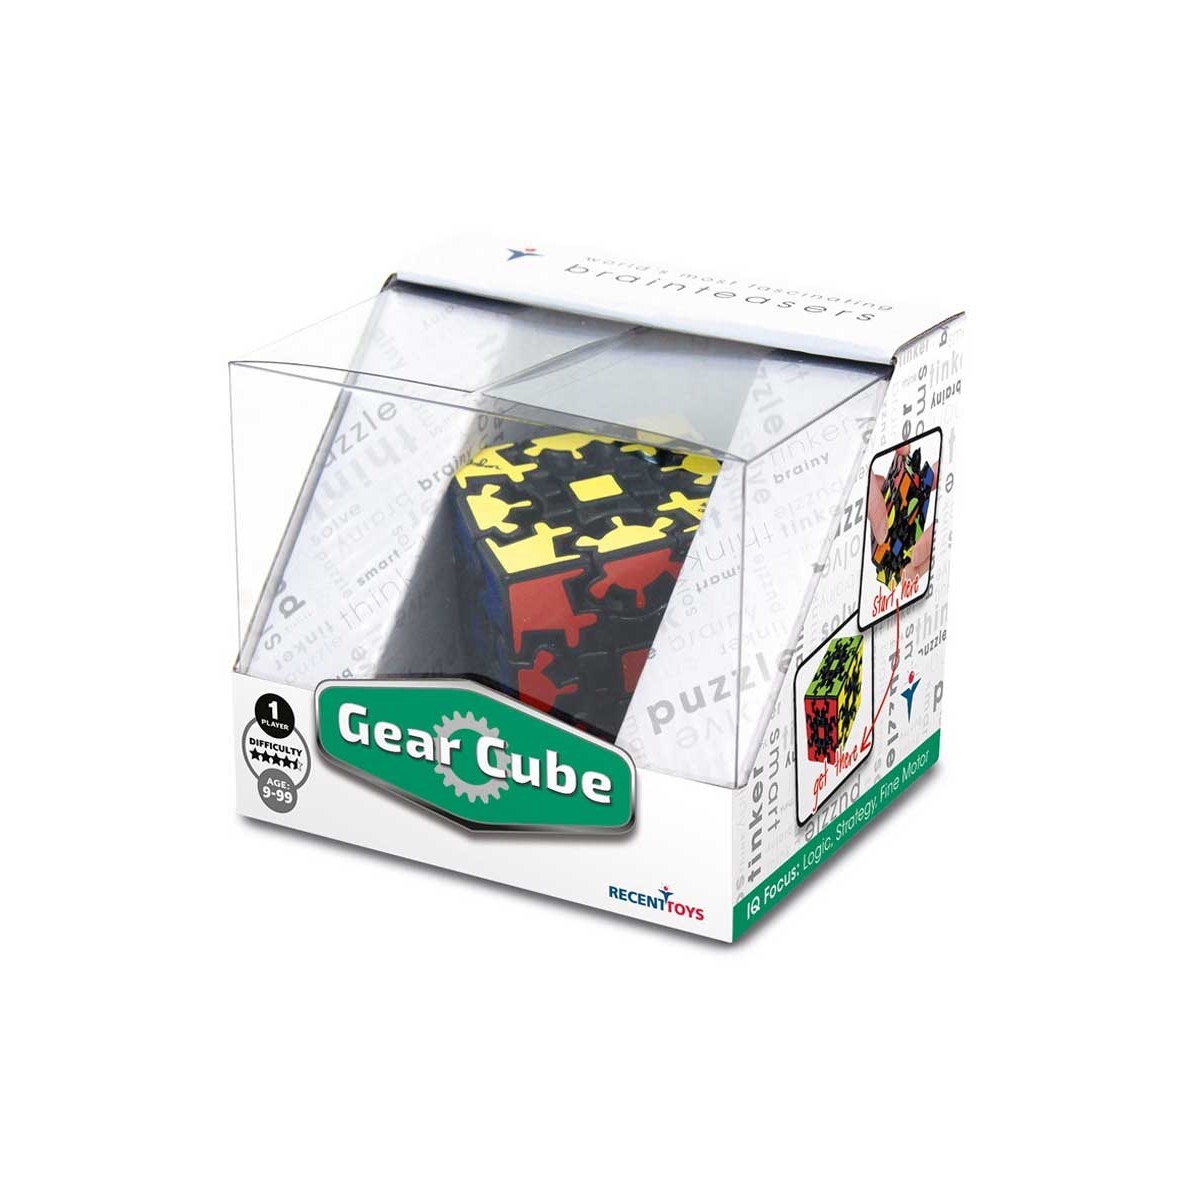 Recent Toys Gear Cube (Cubo...